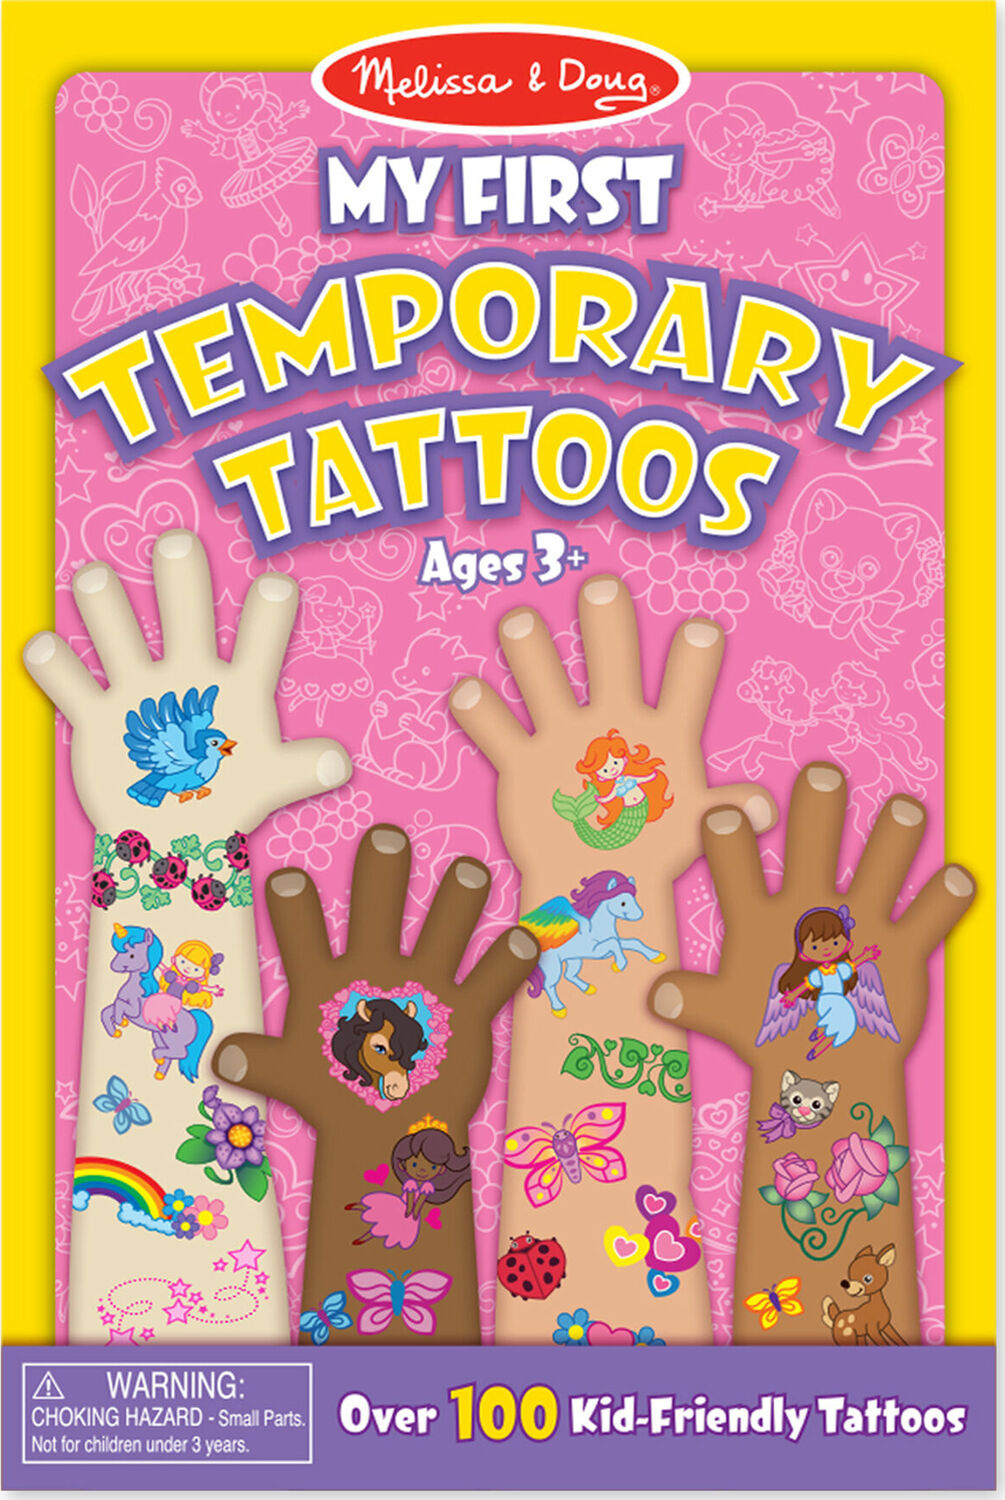 My First Temporary Tattoos: 100+ Kid-Friendly Tattoos - Rainbows, Fairies, Flowers, and More